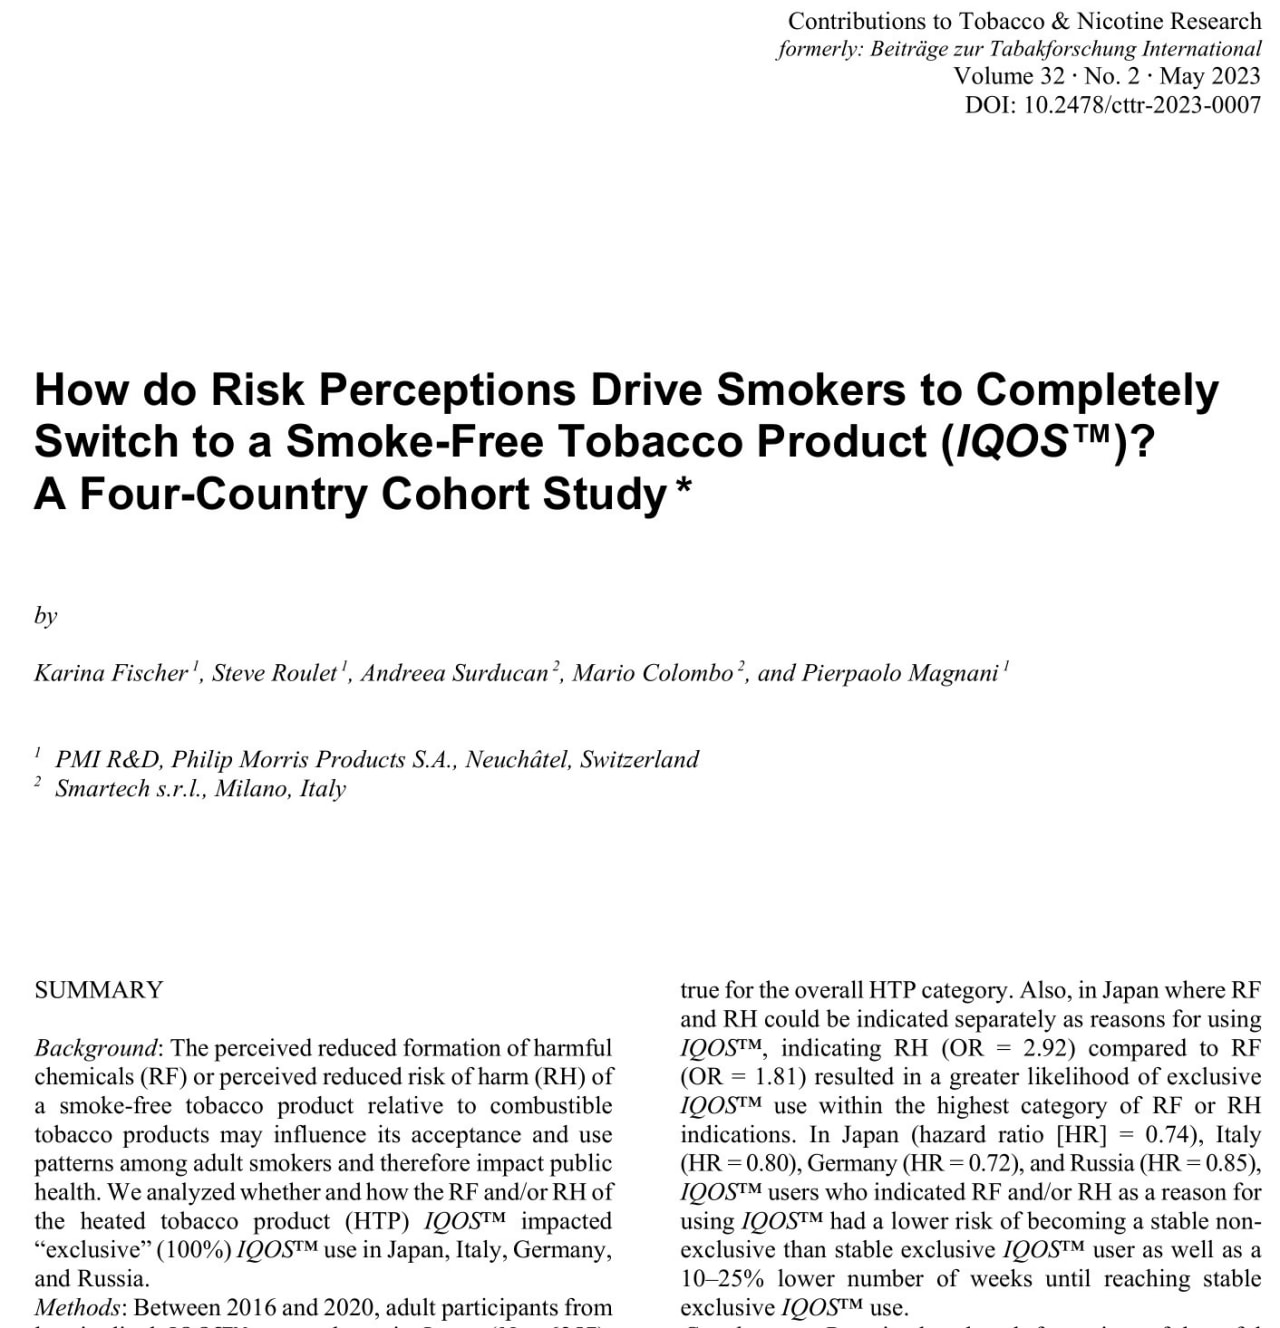 Why reduced-risk claims about smoke-free products are important